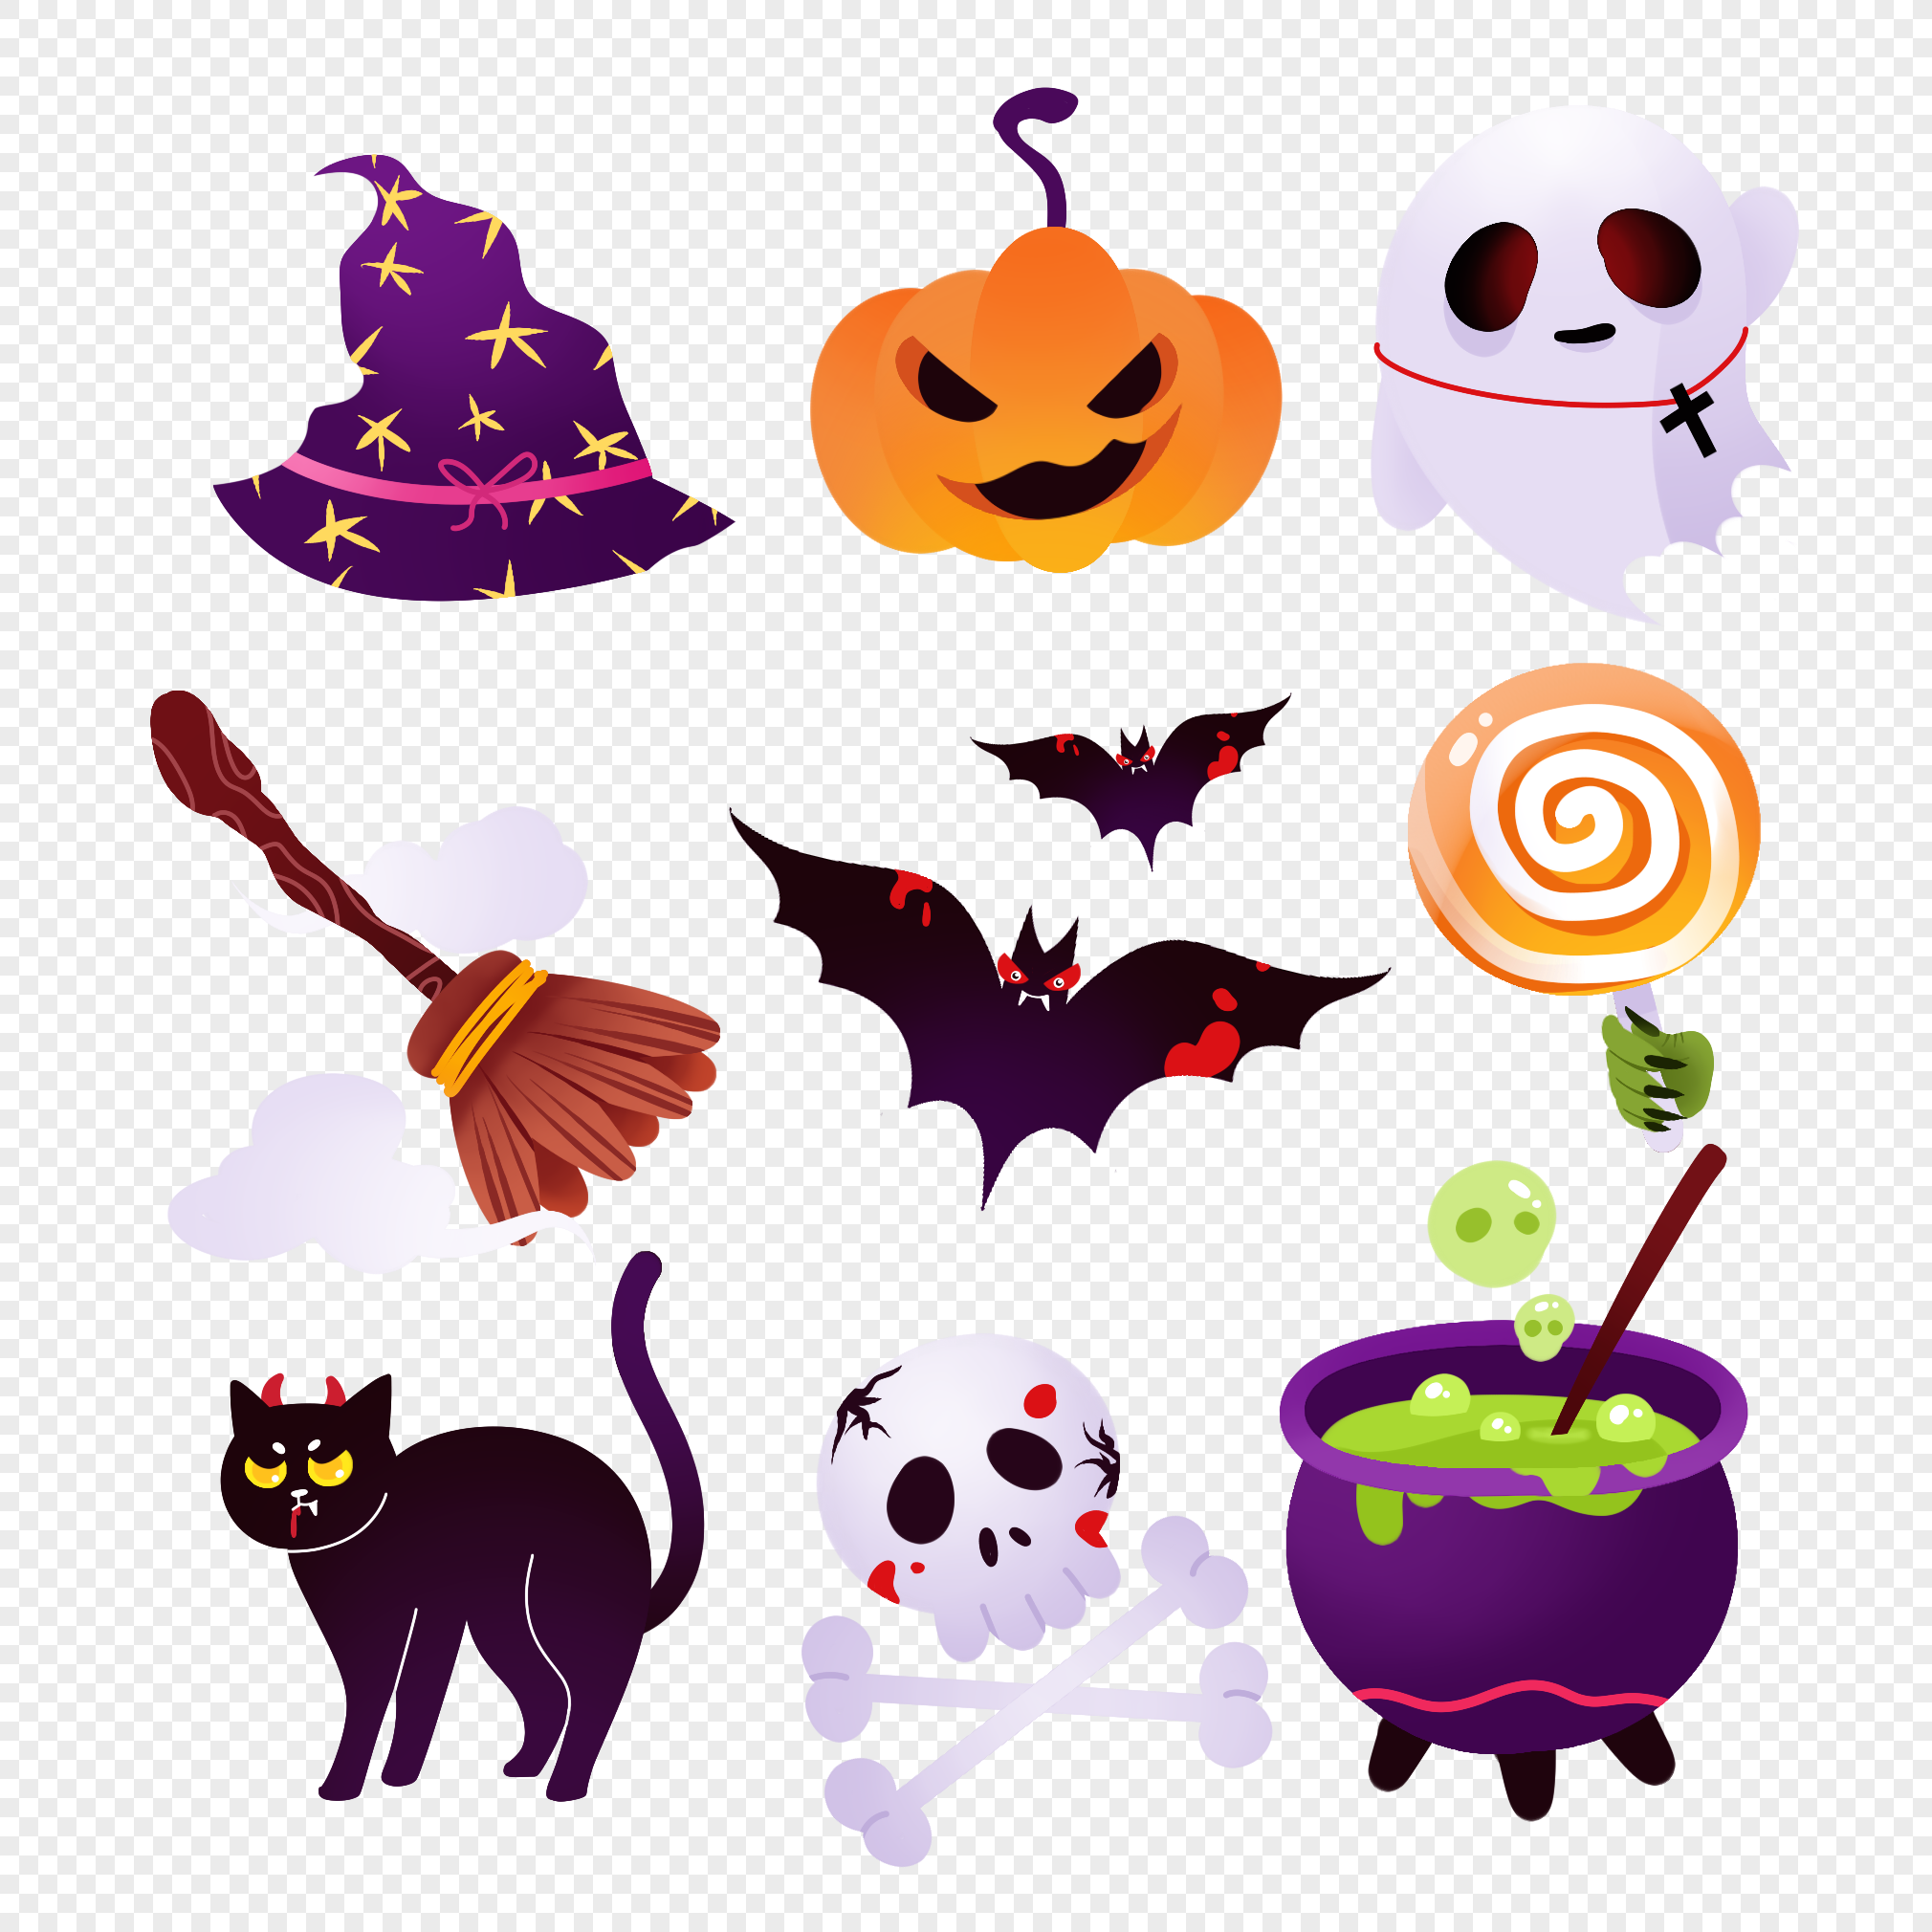 Hand Drawn Halloween PNG Images With Transparent Background | Free ...